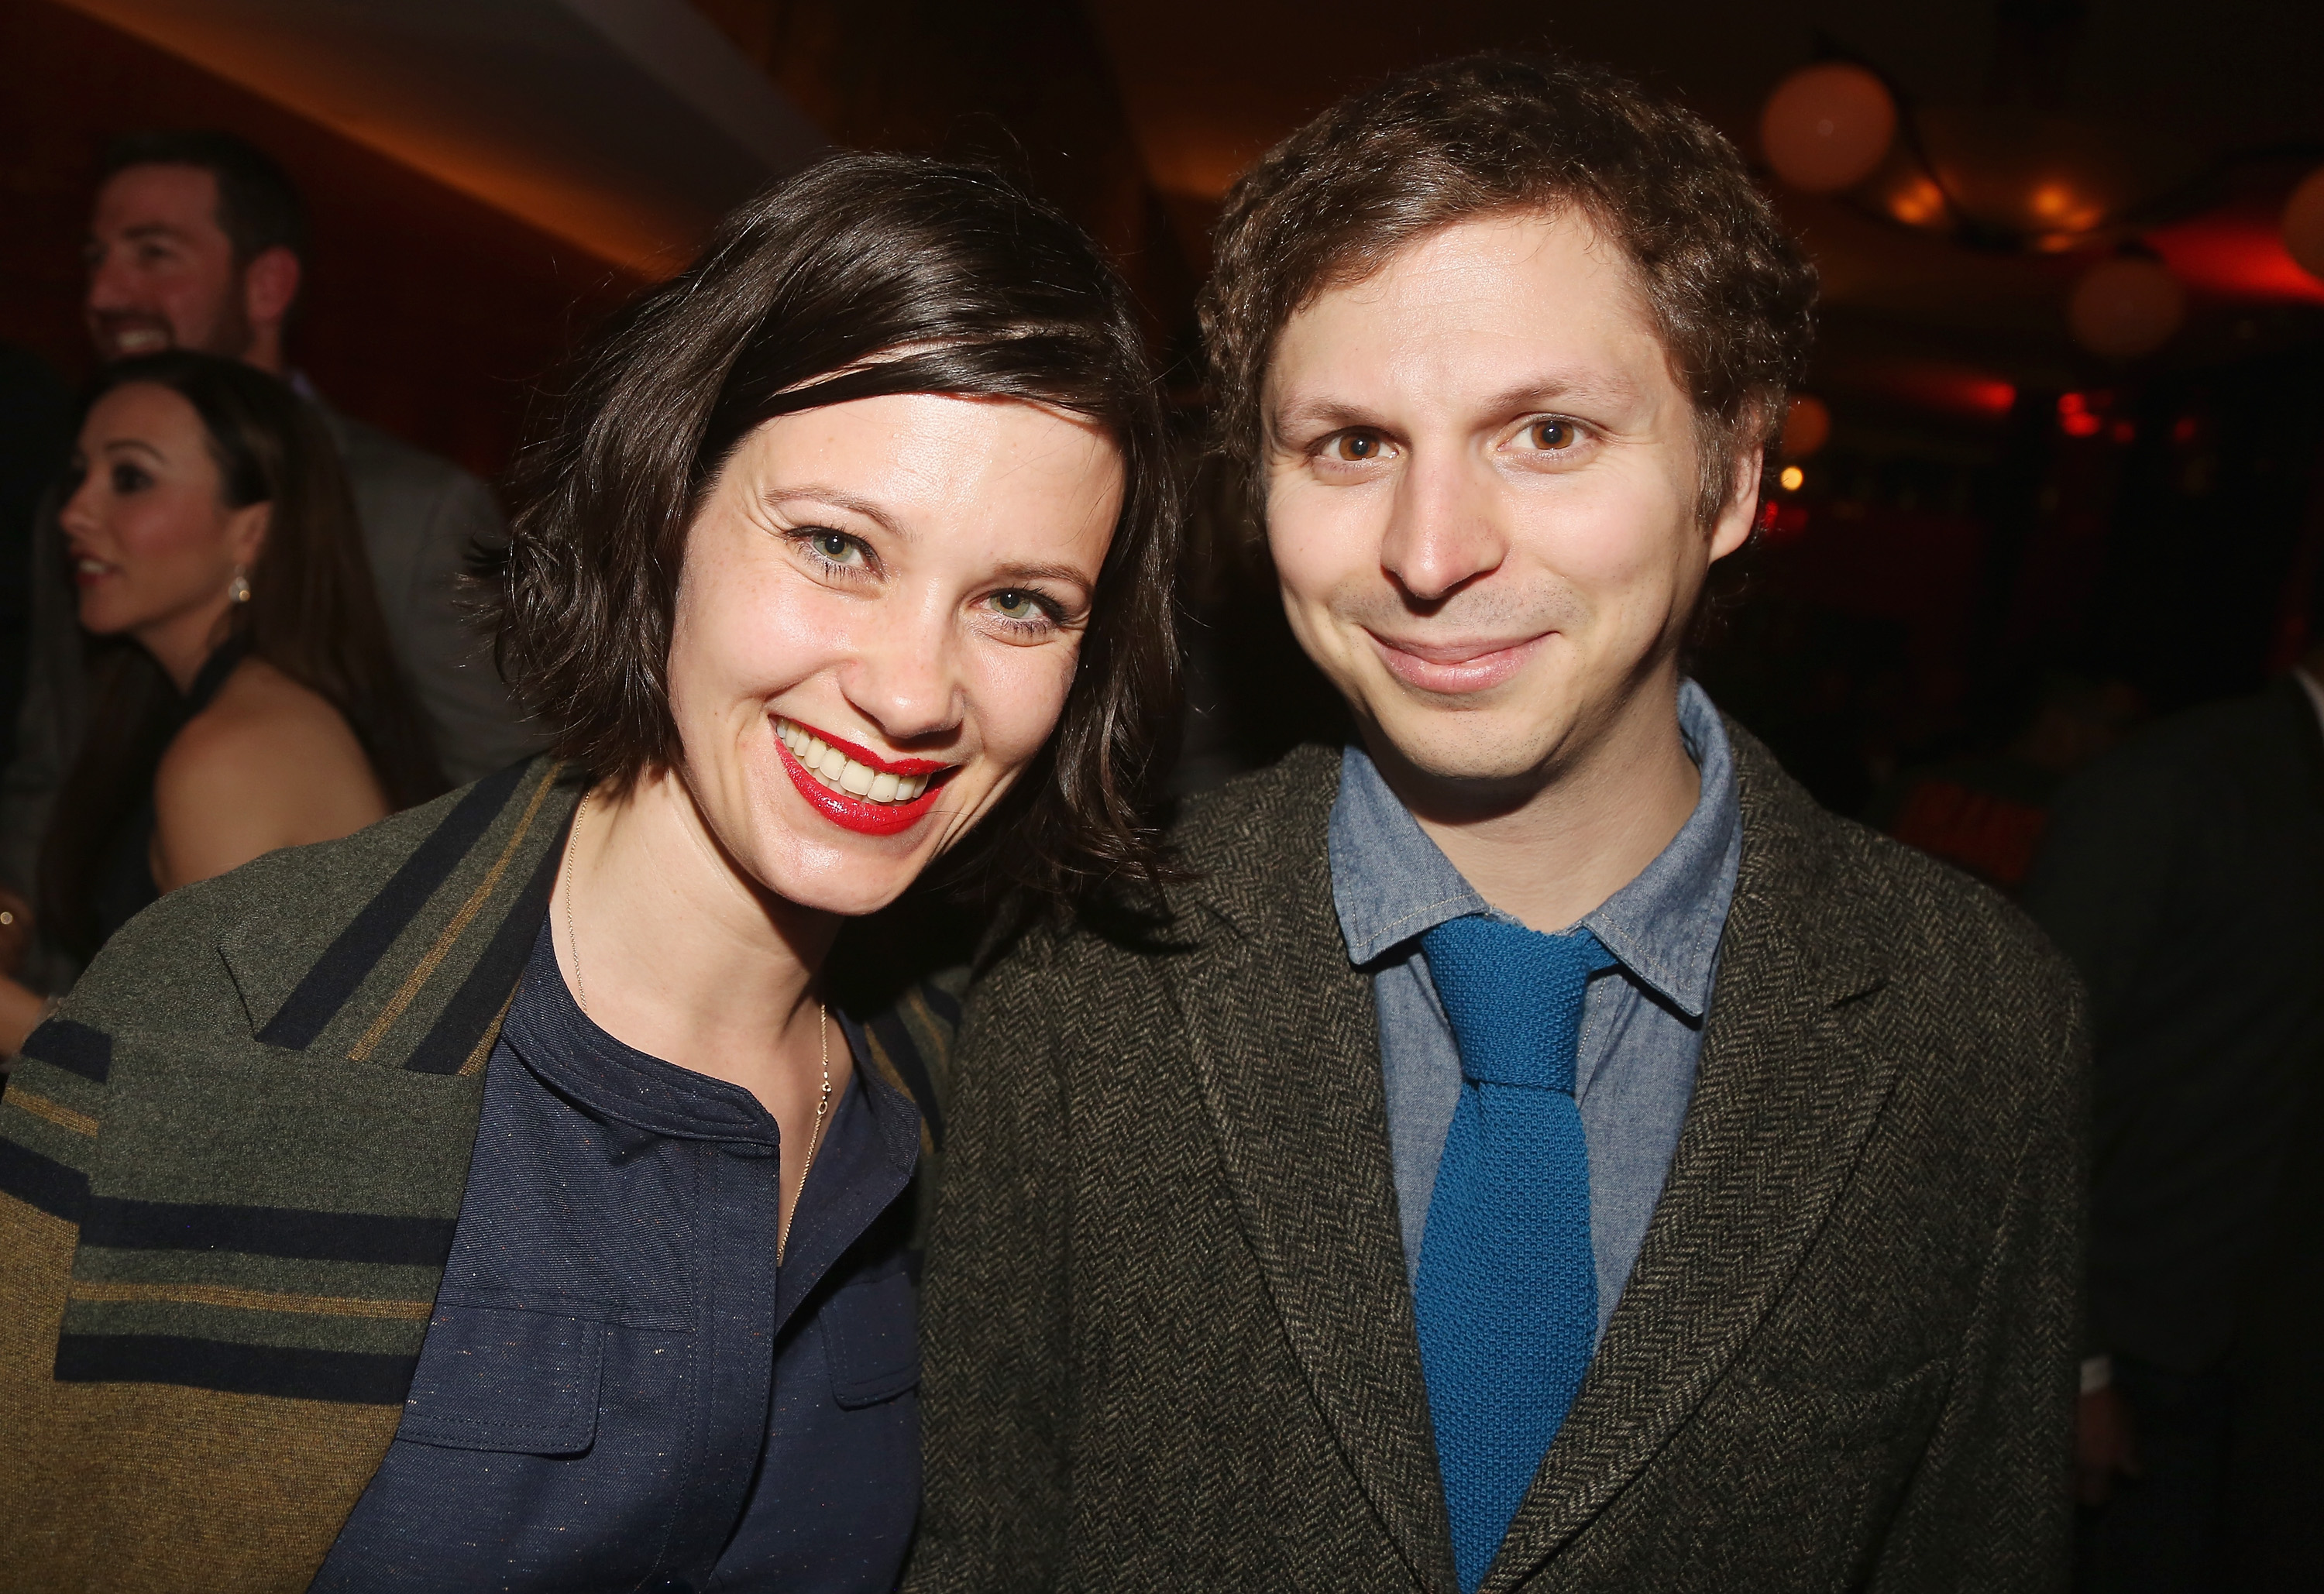 Michael Cera and his wife Nadine in March 2018